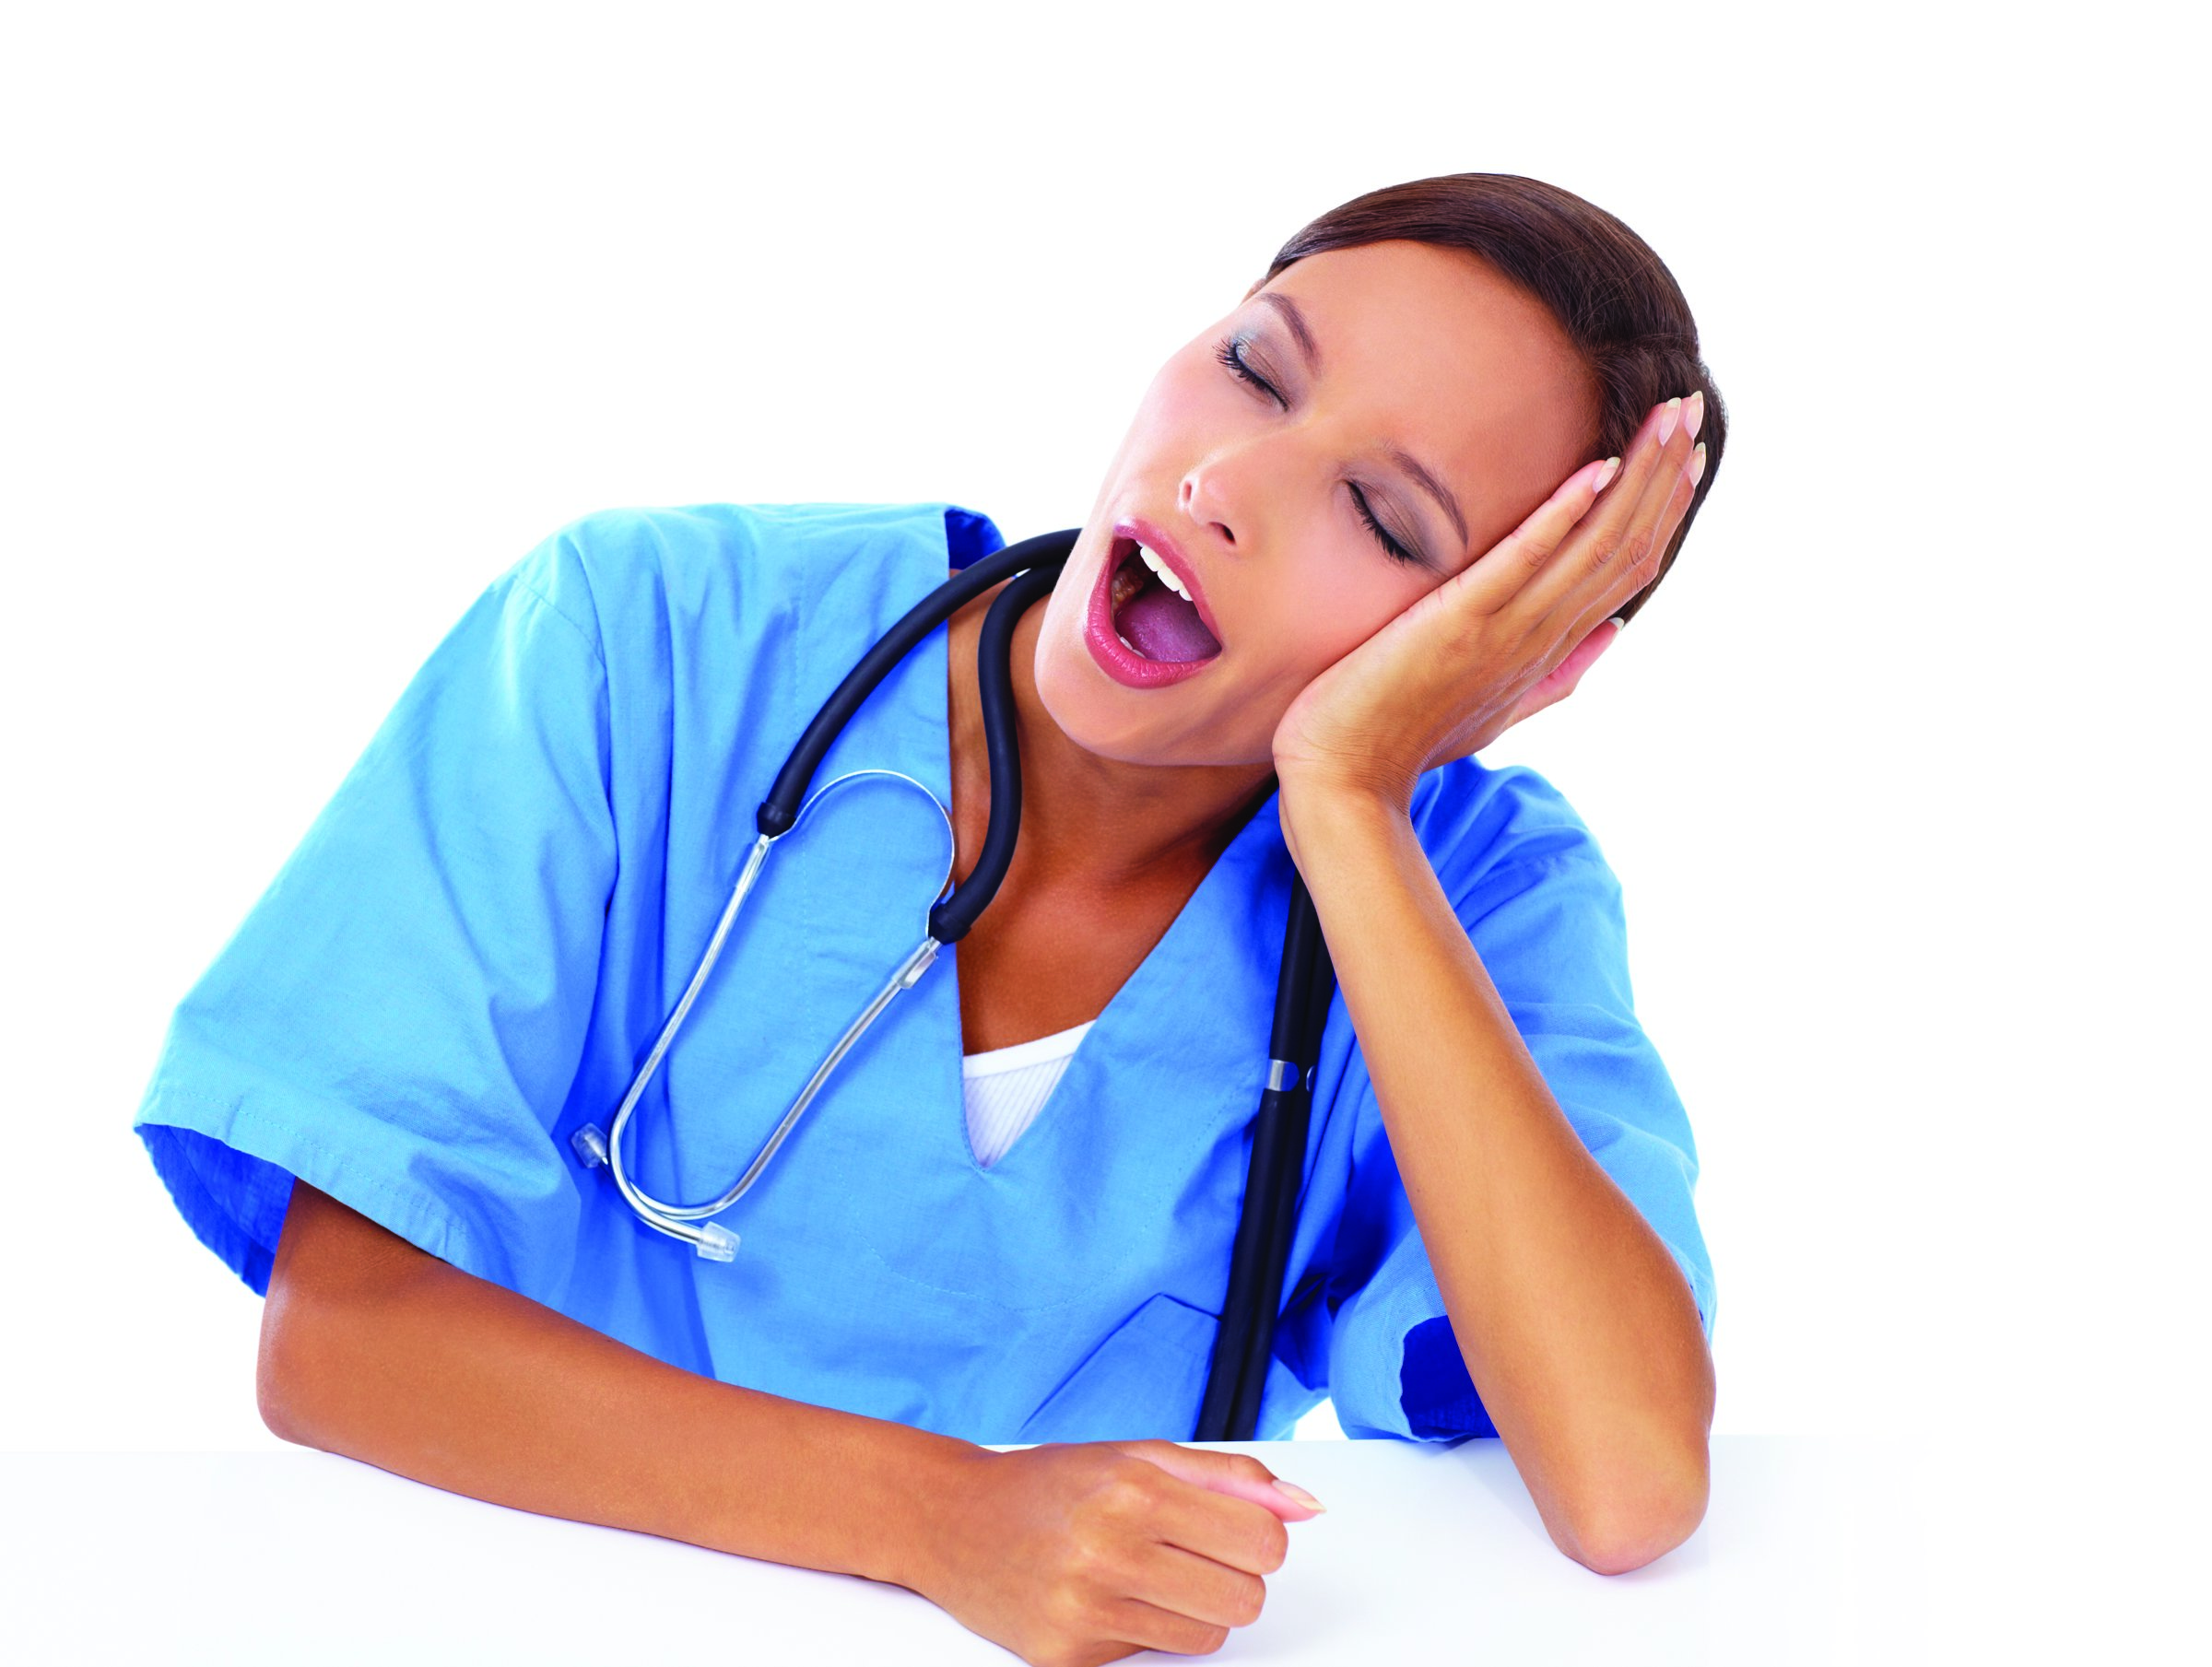 Shift Work Sleep Disorder: What Nurses Should Know